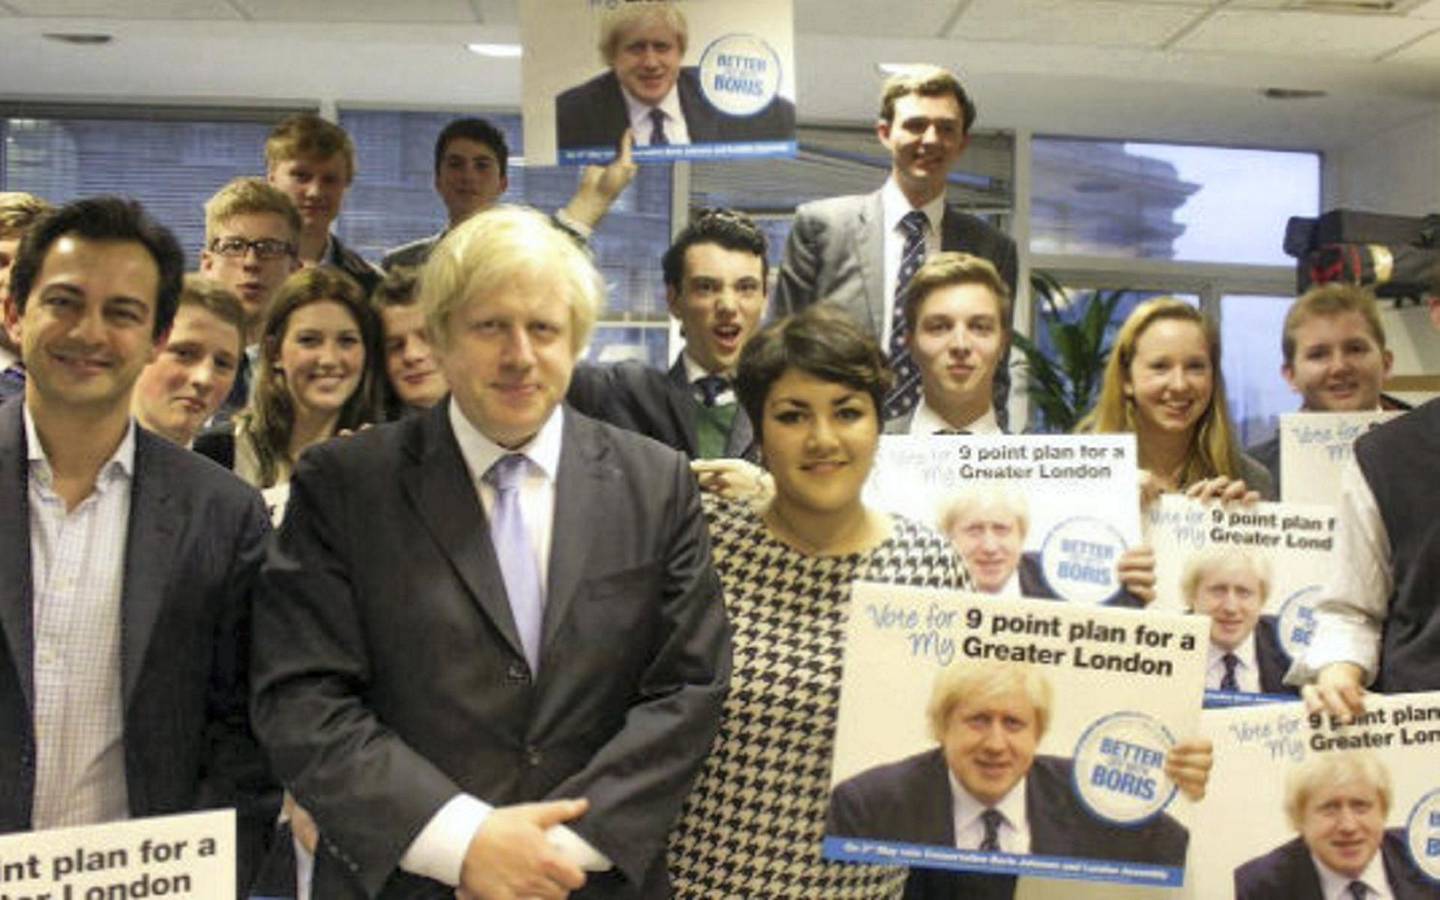 An image of Ana Diamond with Boris Johnson, one of the photos used as evidence against her in her trial. Photo: Ana Diamond